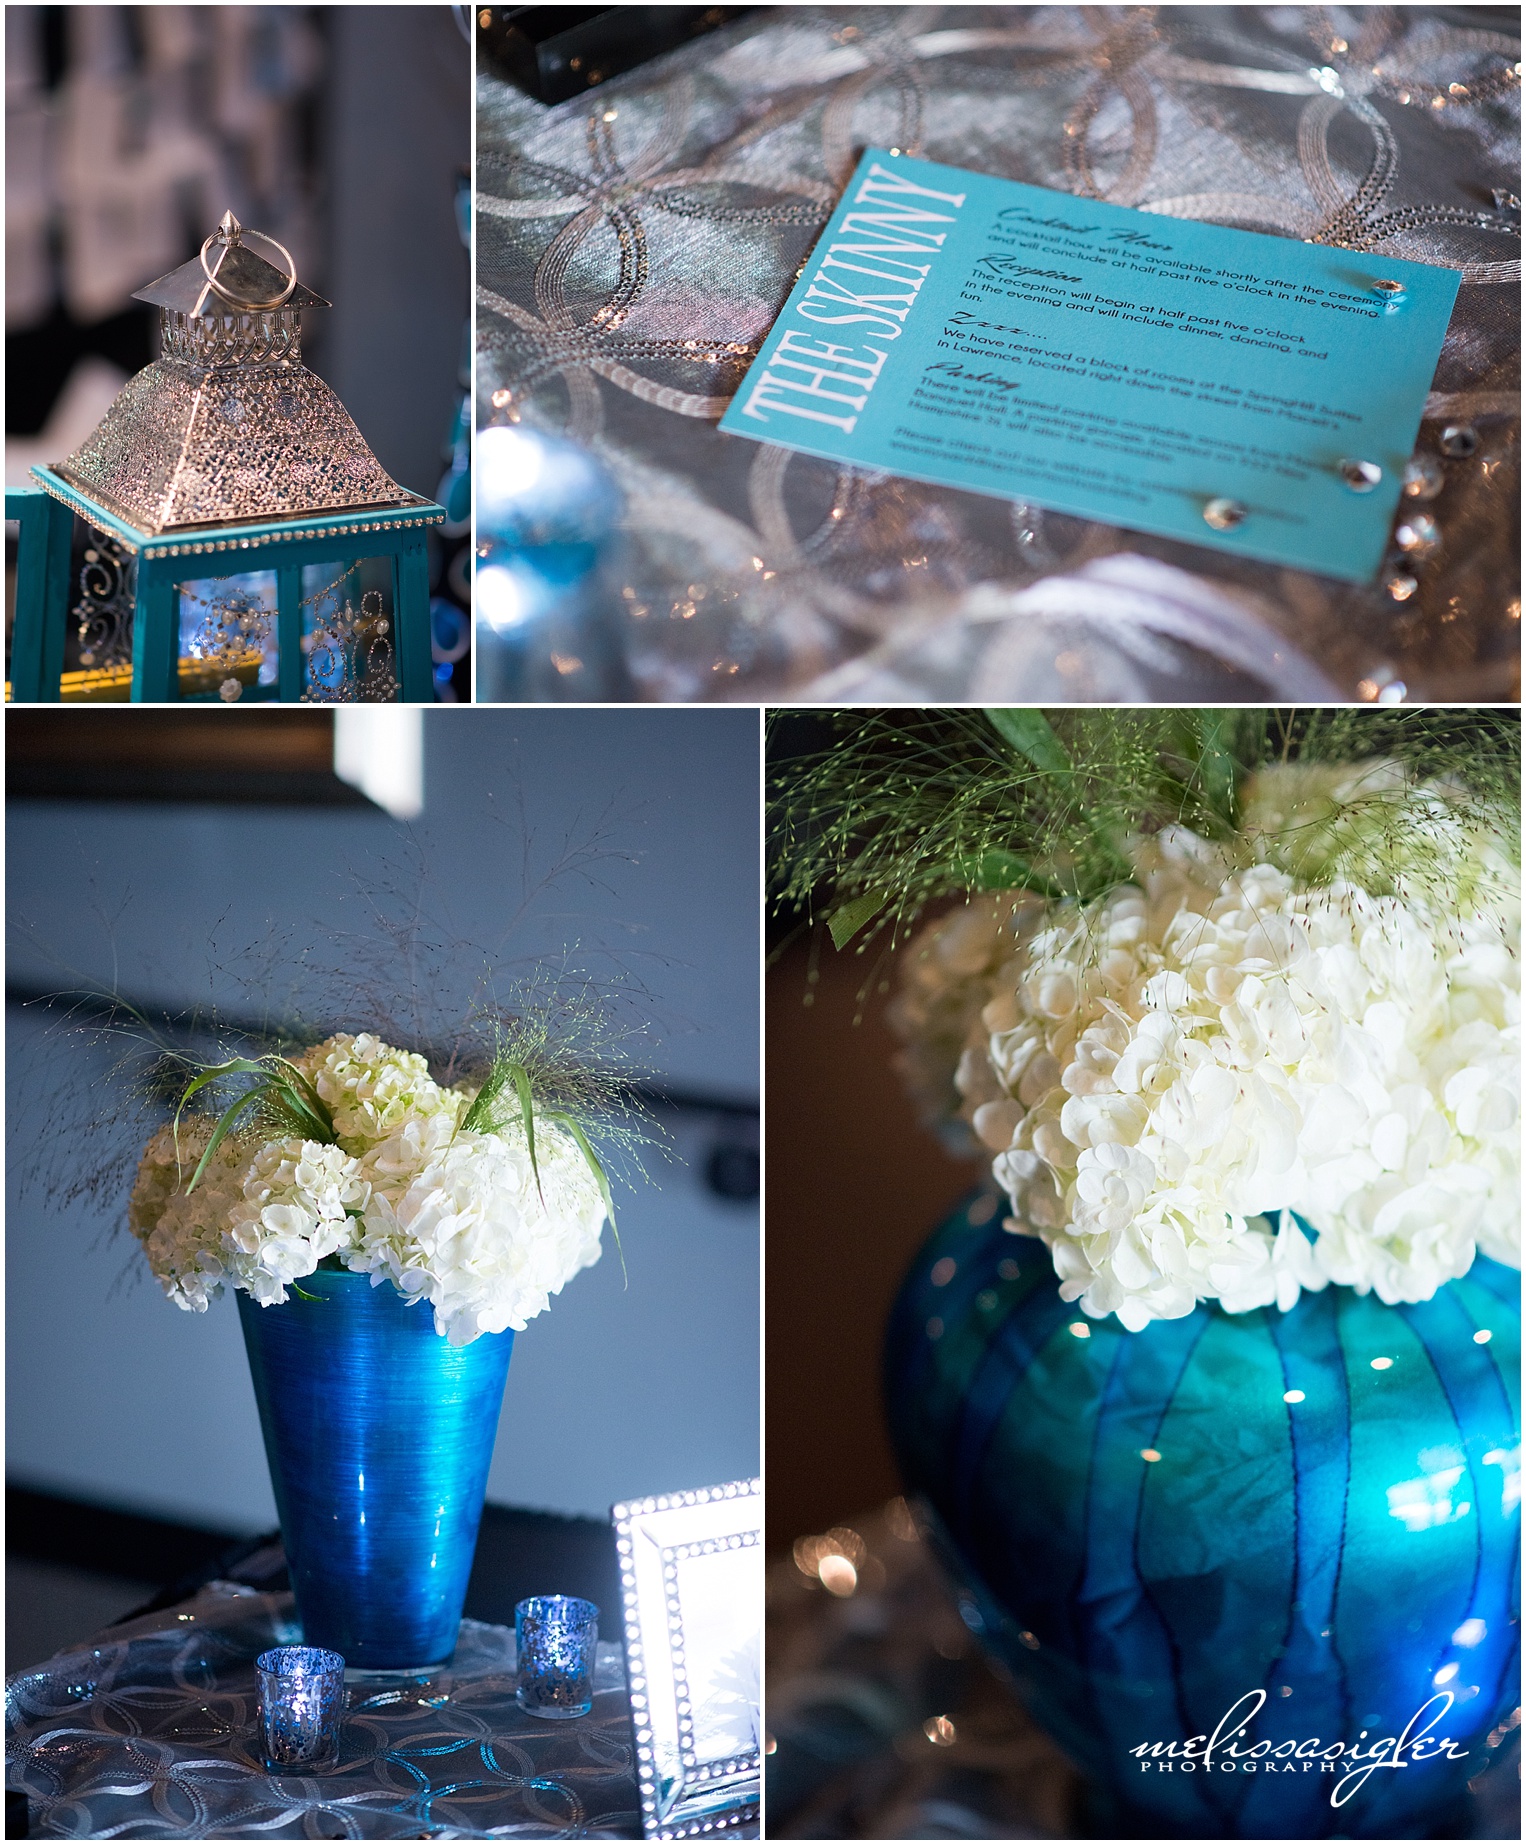 Teal wedding color by Melissa Sigler Photography